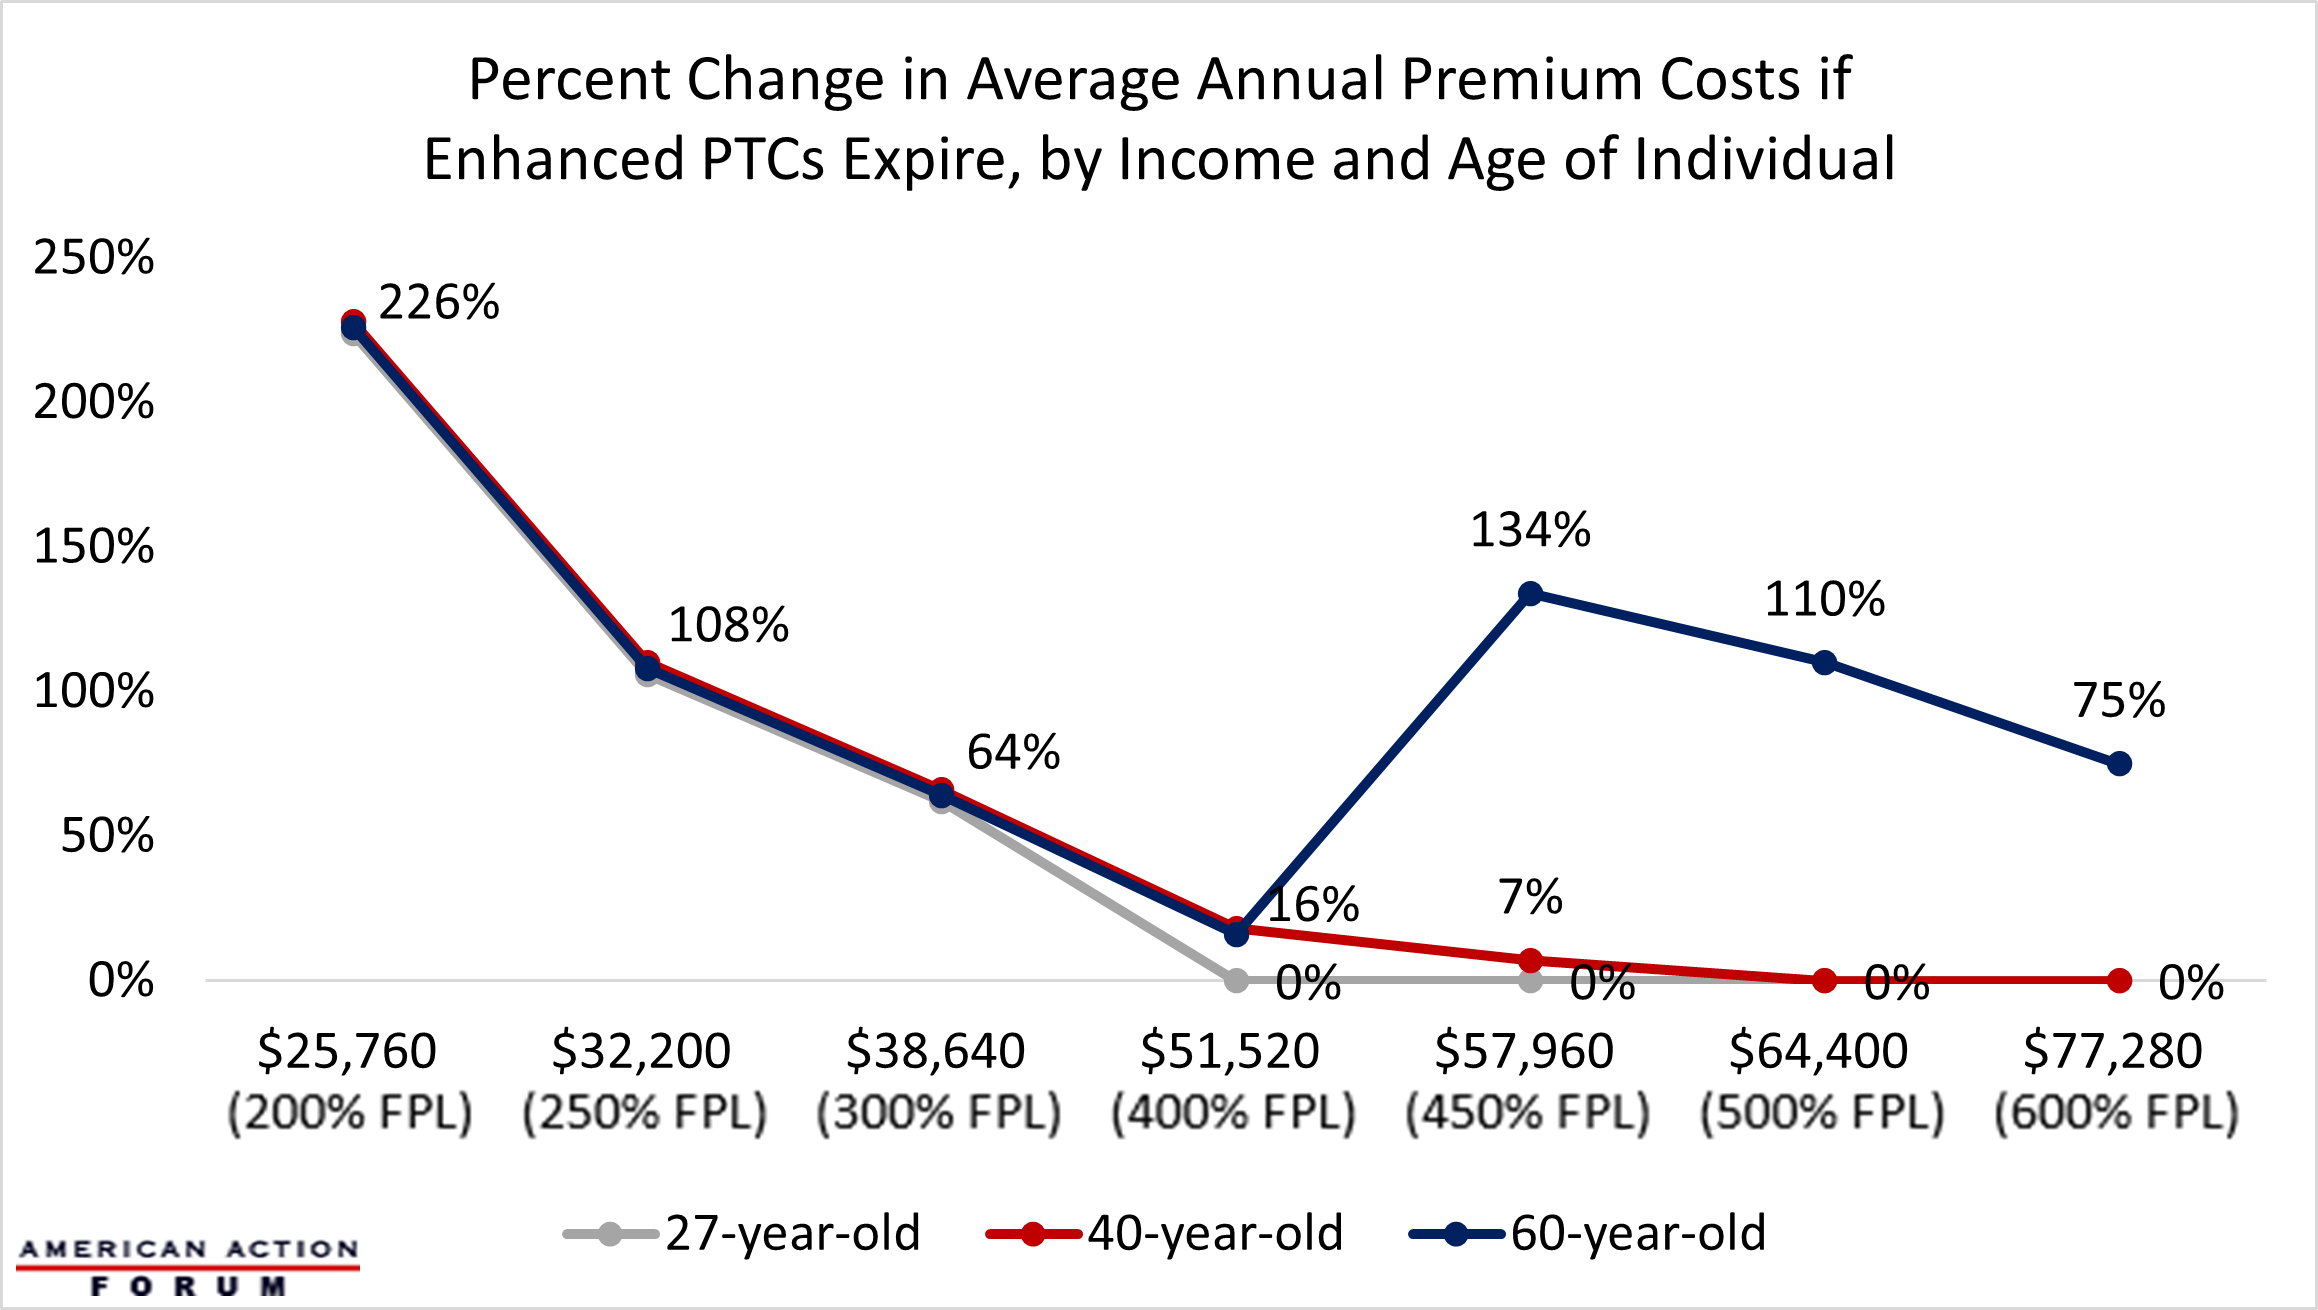 Percent Change in Average Annual Premium Costs if Enhanced PTCs Expire, by Income and Age of Individual